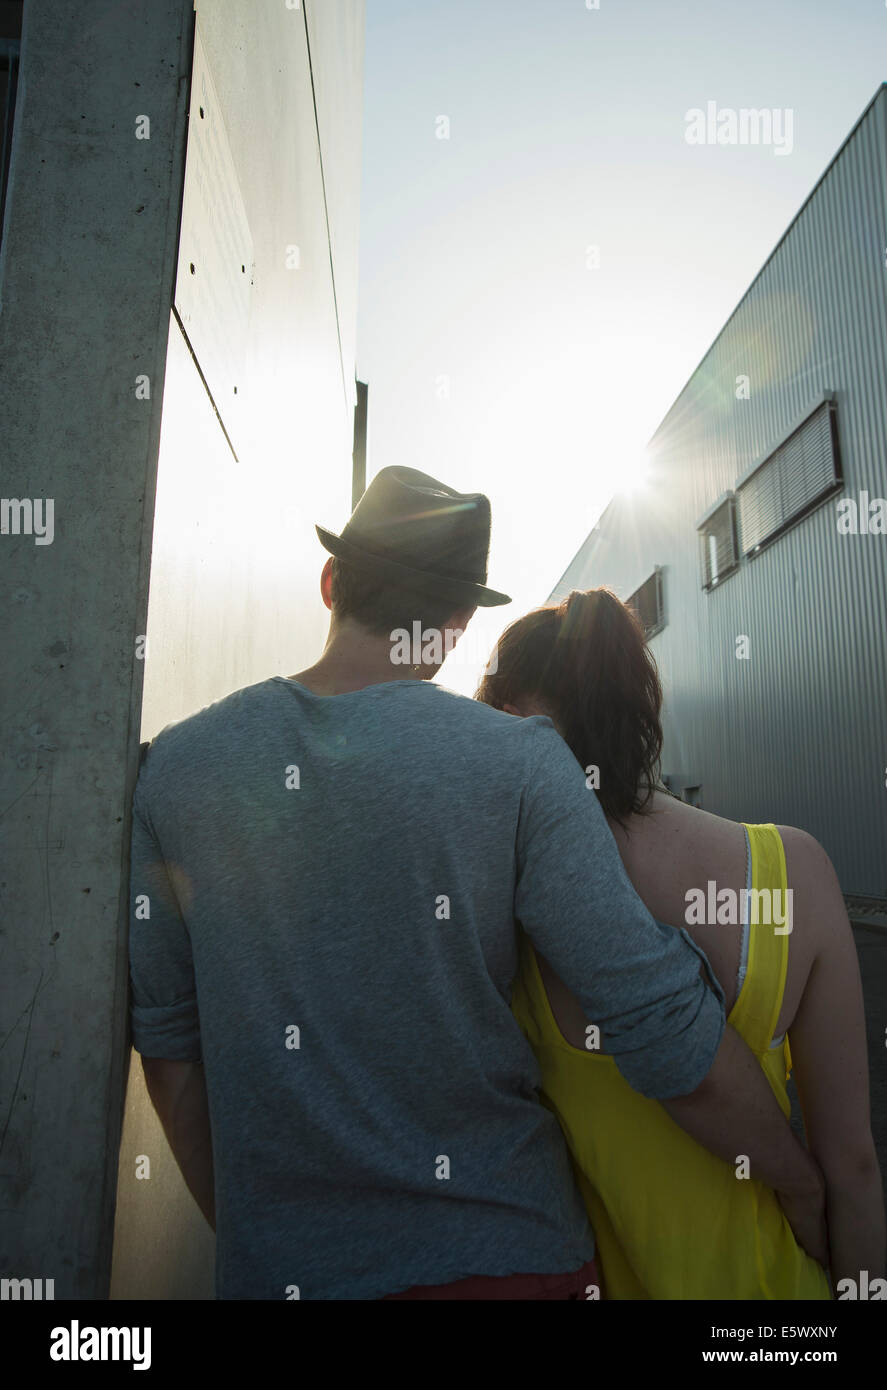 Rear view of young couple in street Stock Photo